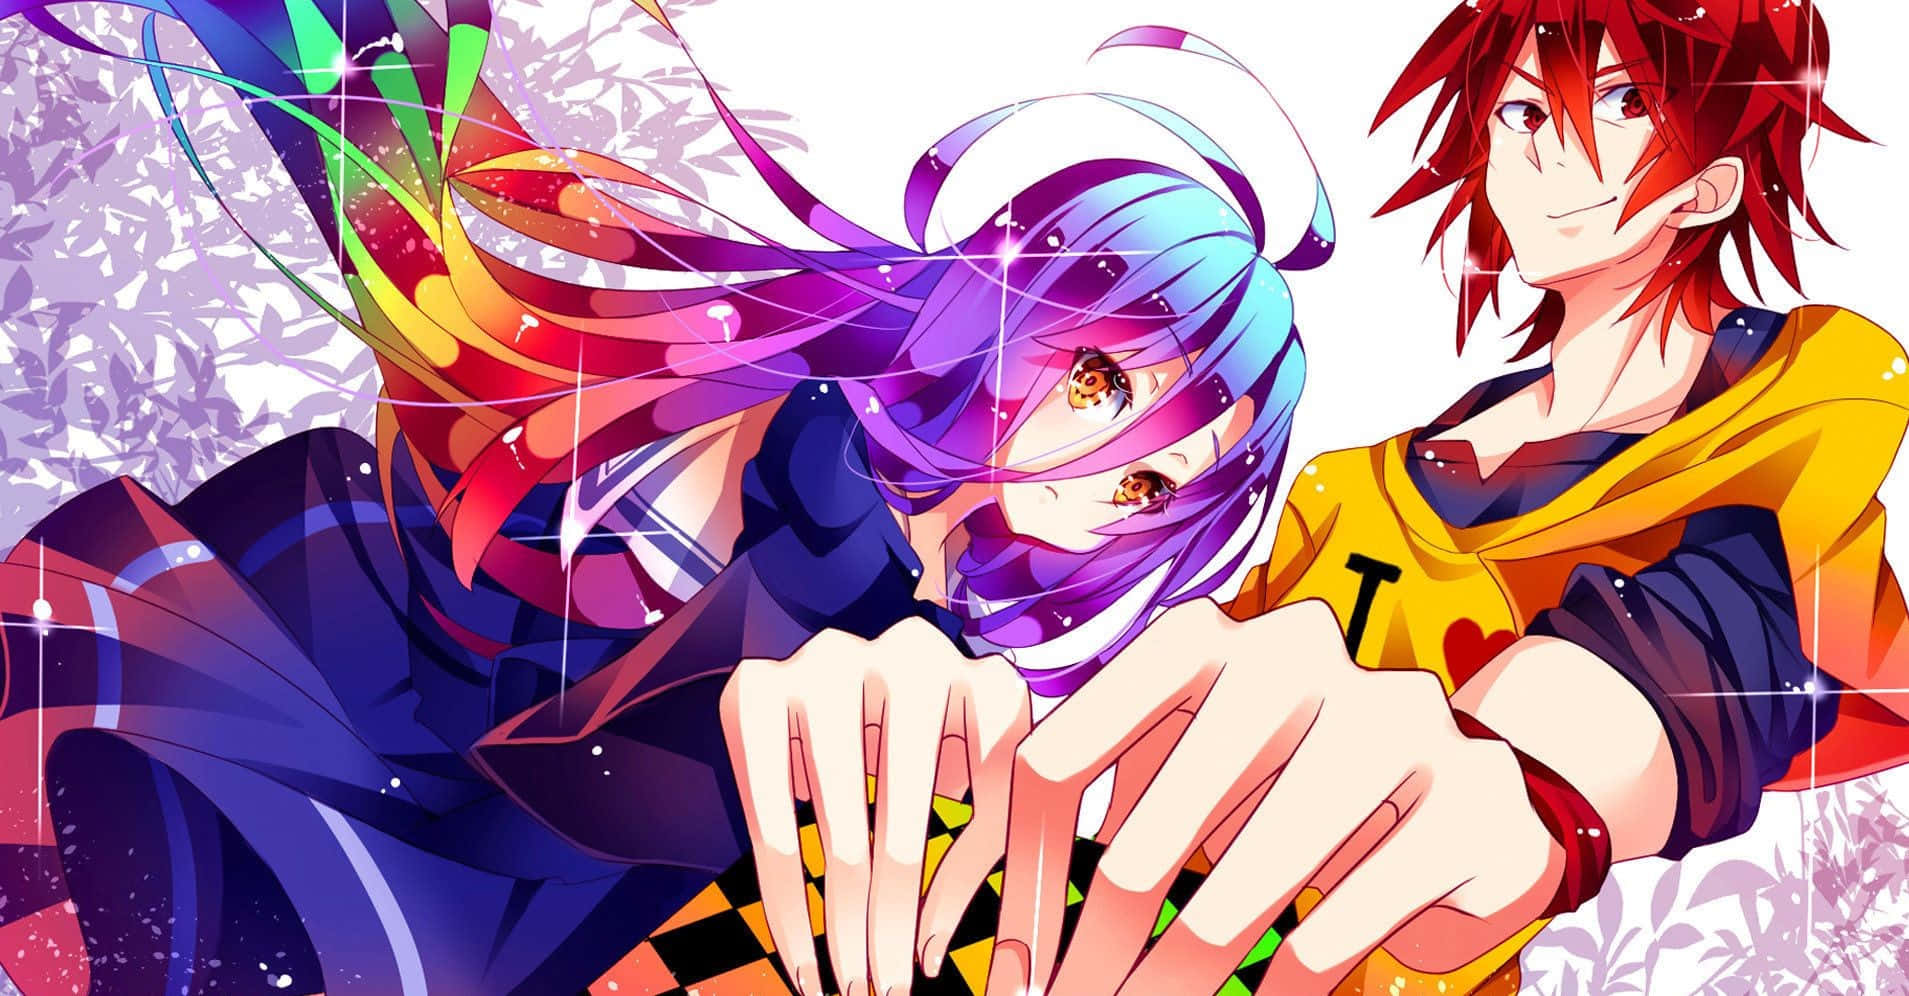 Two steps closer to victory in No Game No Life